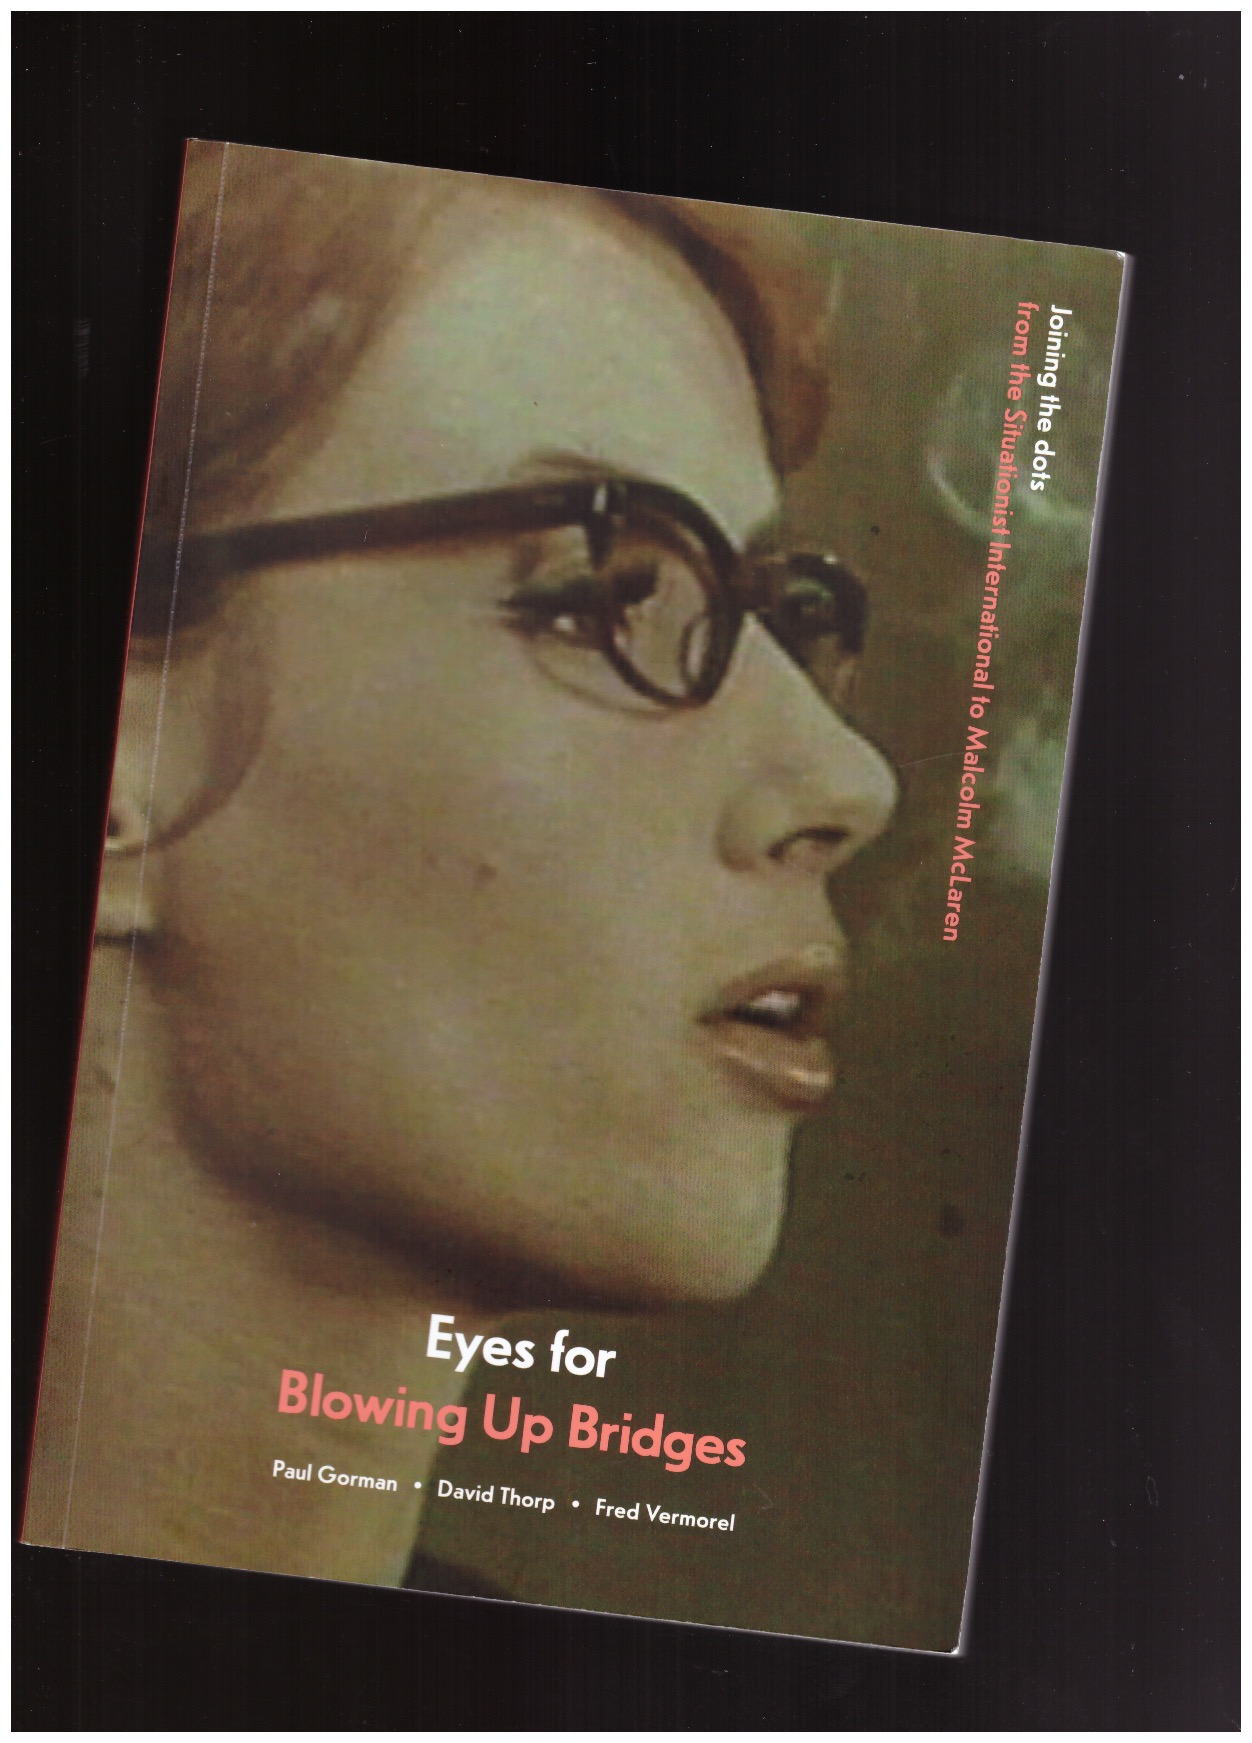 GORMAN, Paul; THORP, David; VERMOREL, Fred (ed.) - Eyes for Blowing Up Bridges: Joining the dots from the Situationist International to Malcolm McLaren